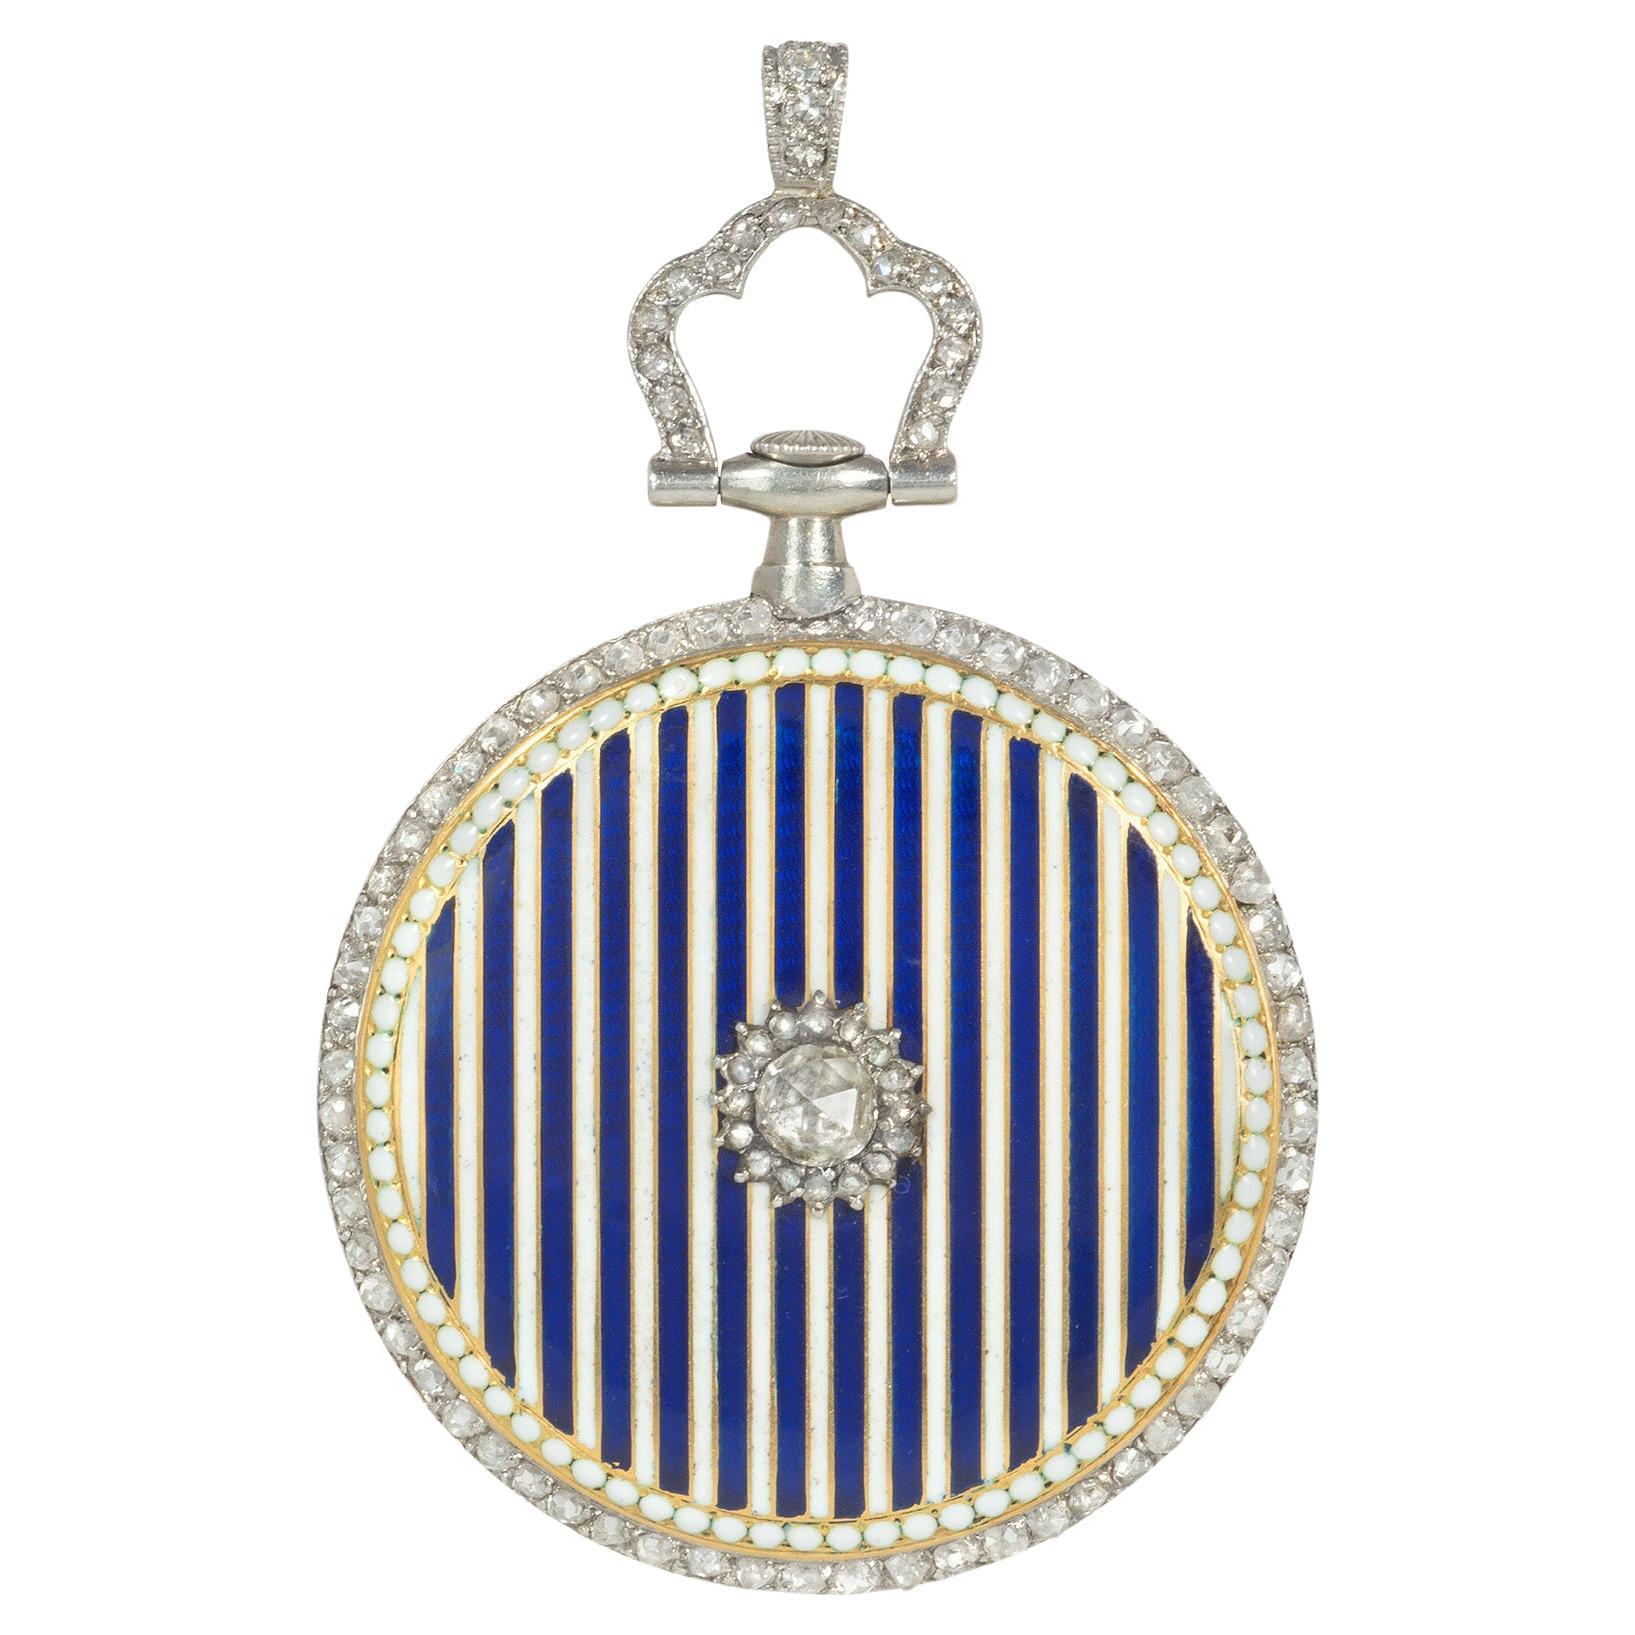 Early 20th C. Cartier Blue and White Enamel and Rose Diamond Watch Pendant